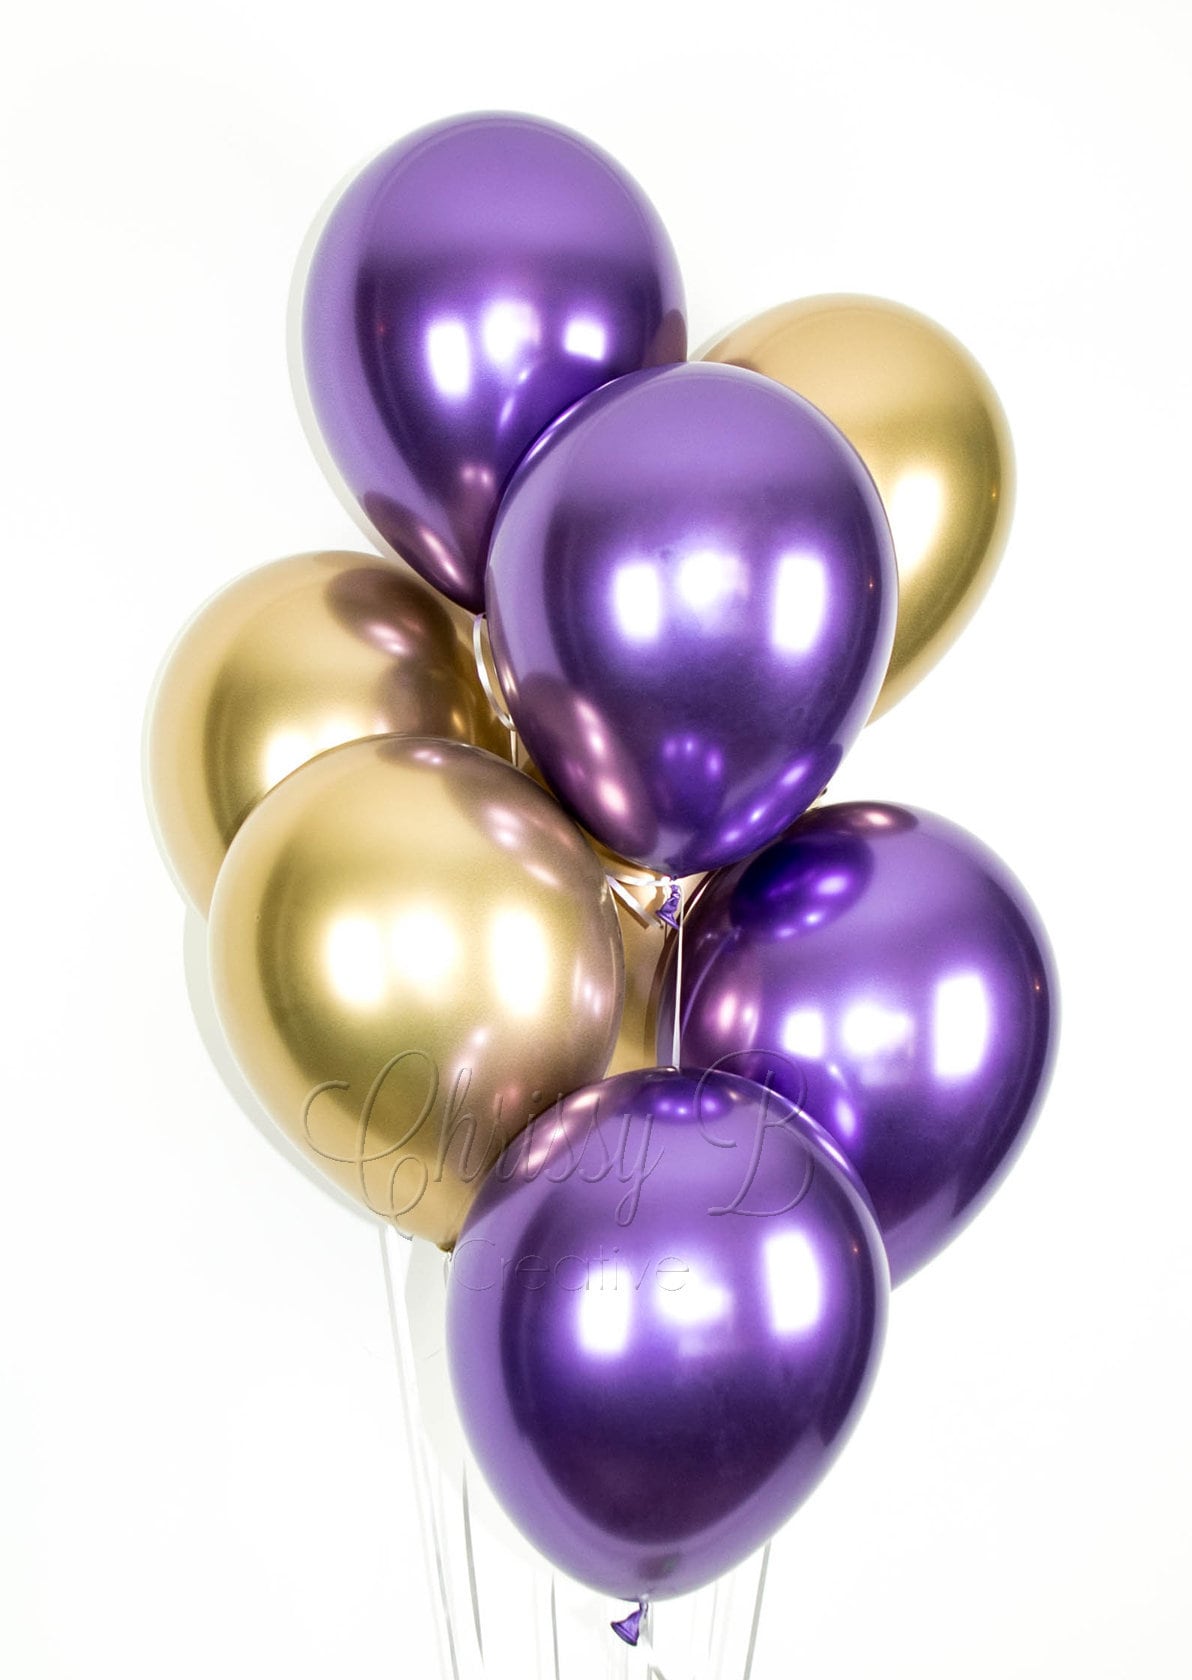 PURPLE and GOLD Balloons - Purple and Gold Chrome Balloon Bouquet - New  from Qualatex - 8 Metallic Latex Balloons - Graduation Balloons